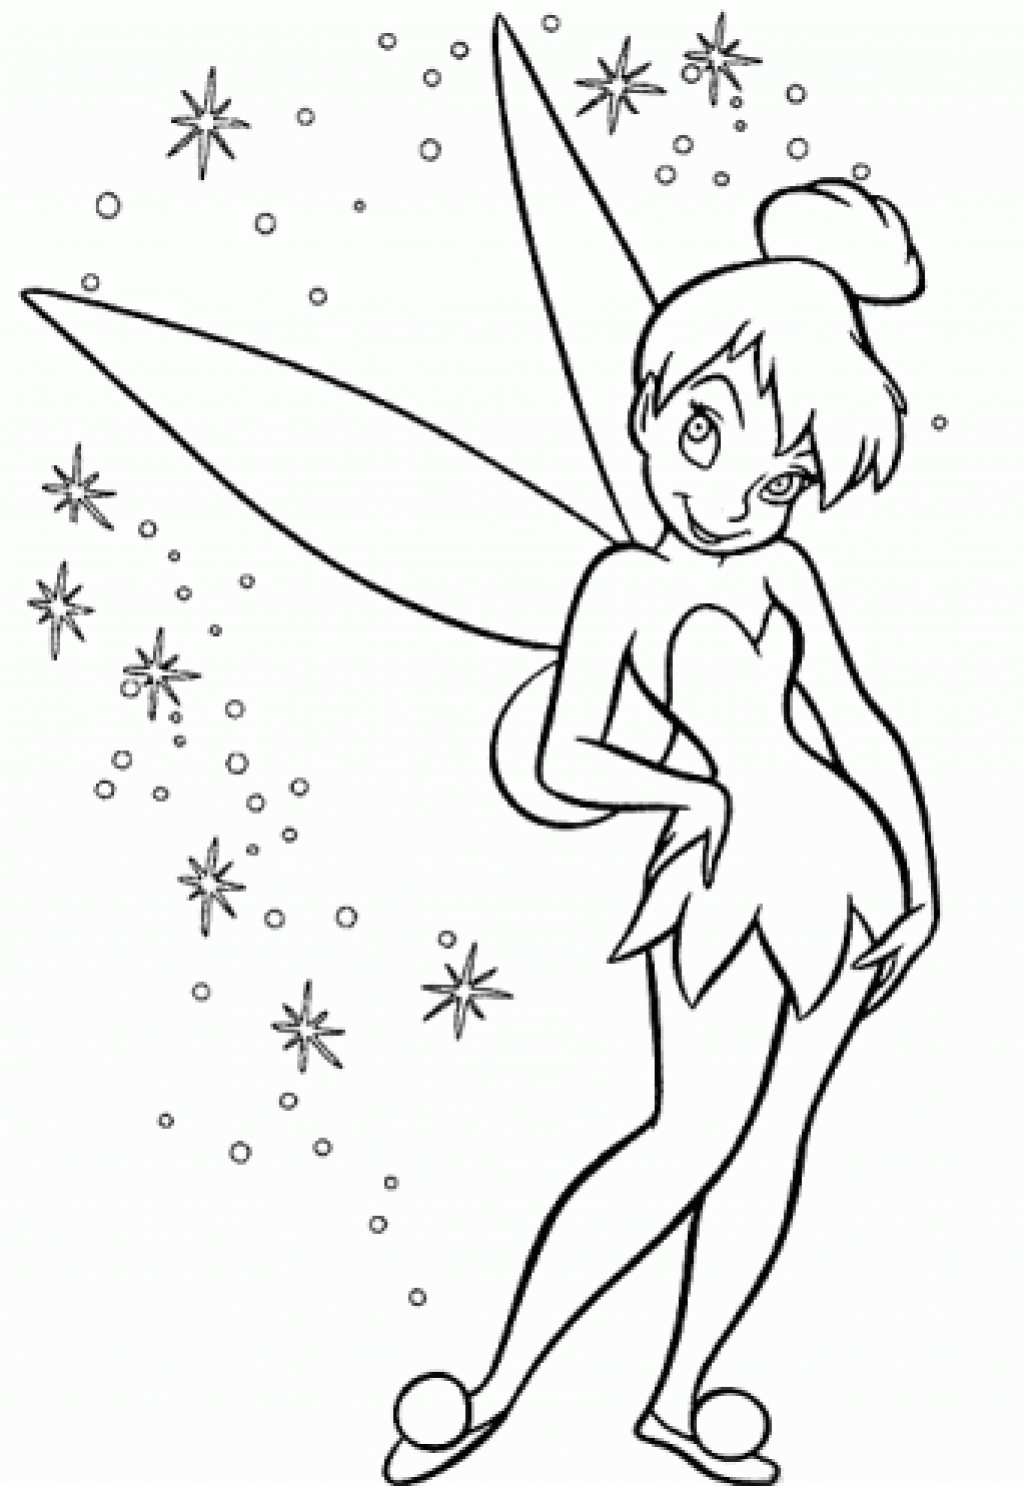 Free Printable Tinkerbell Coloring Pages For Kids - SheetalColor.com